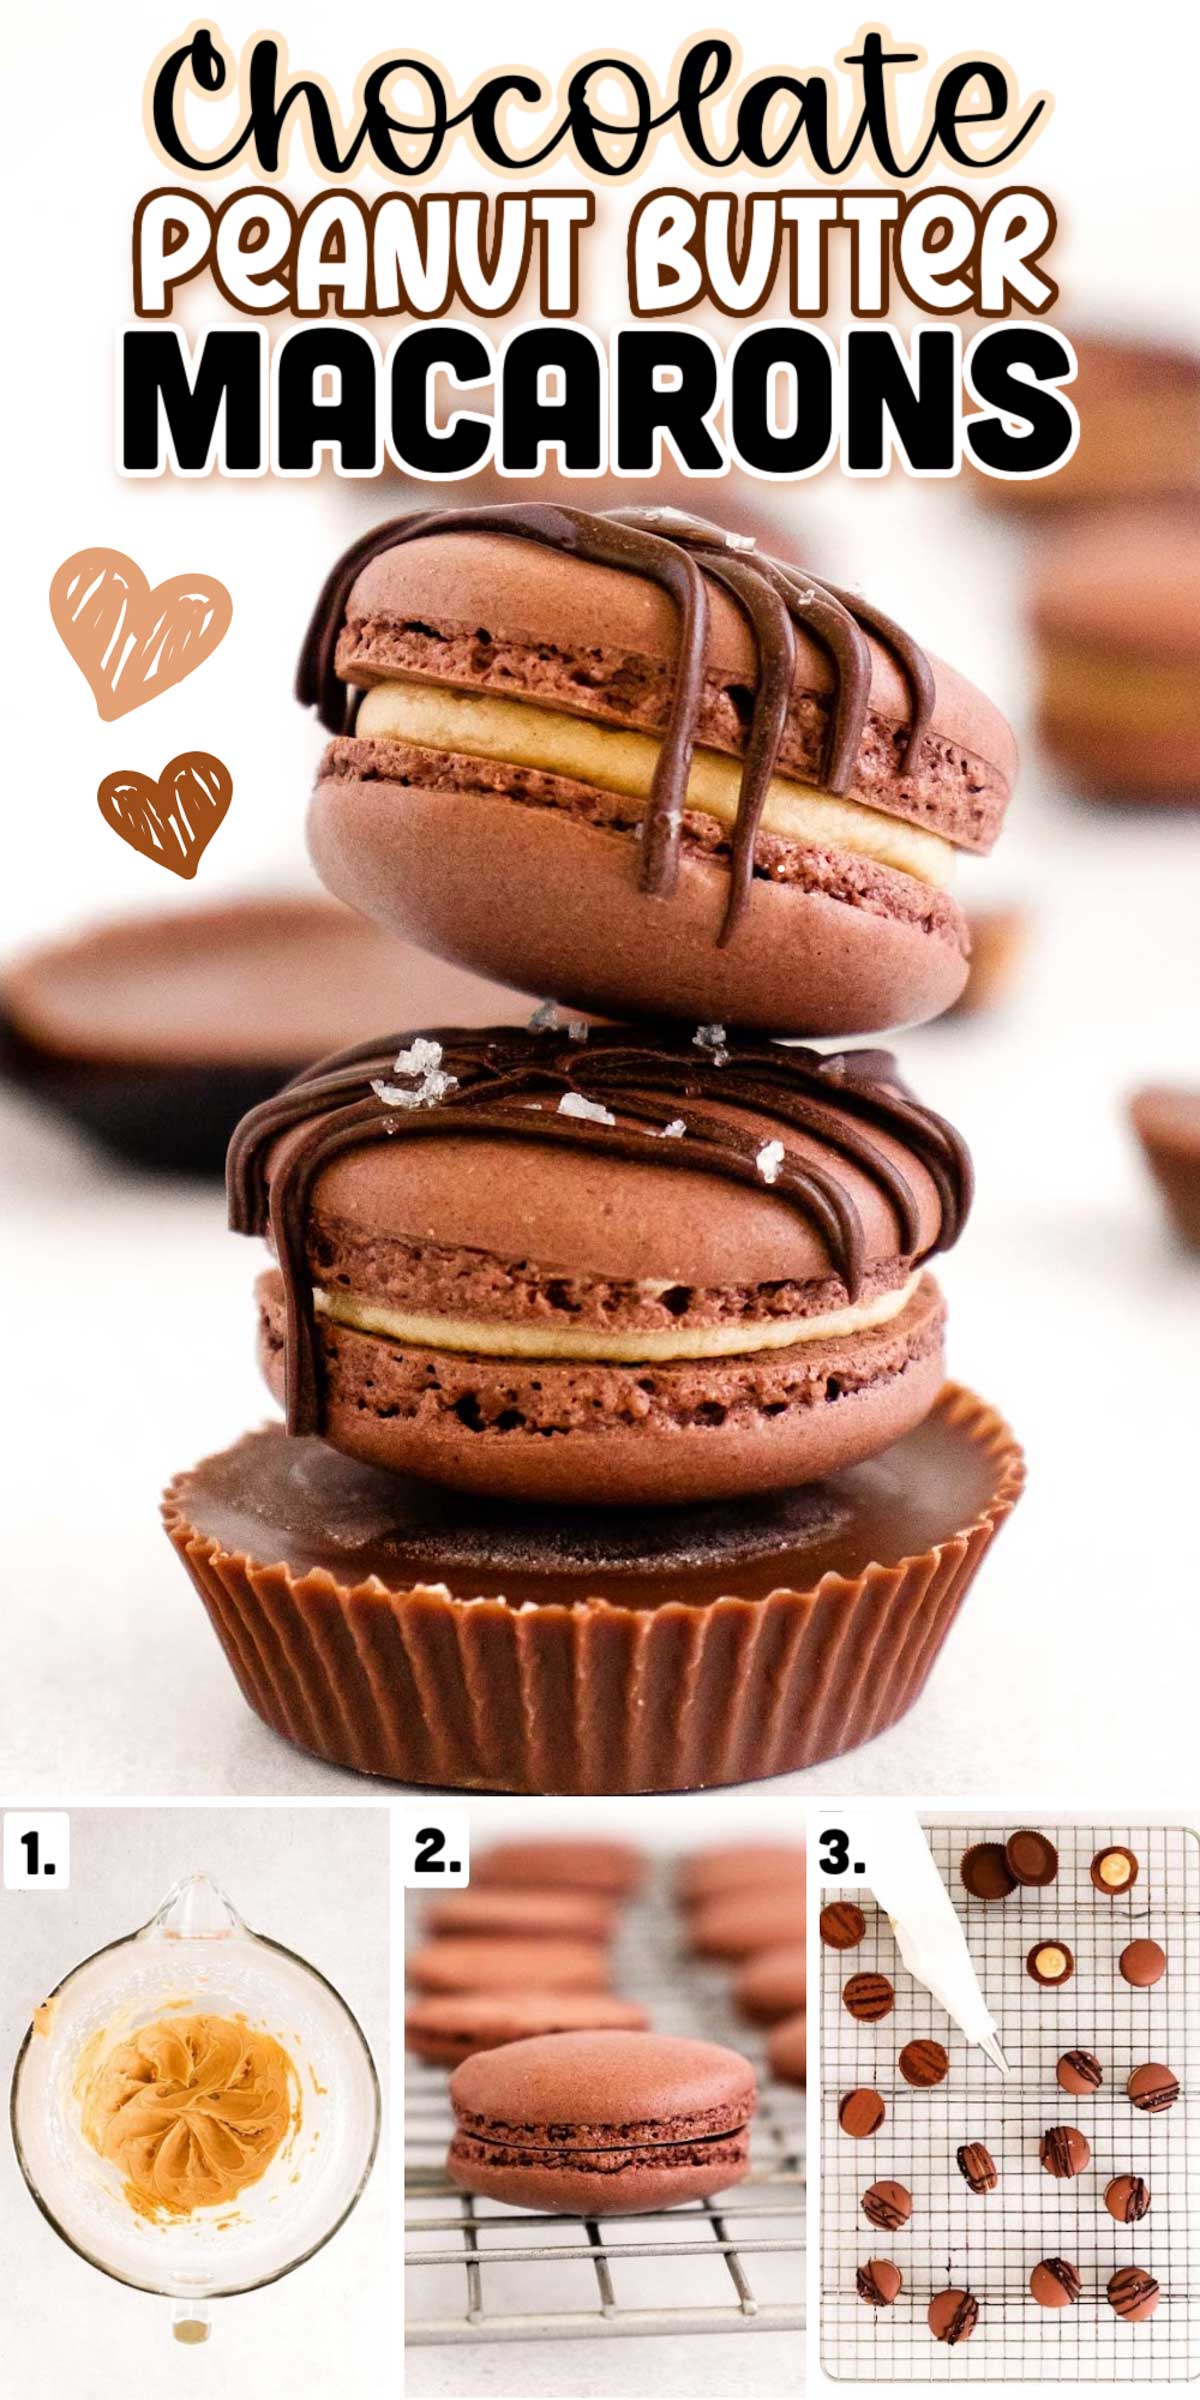 Chocolate Peanut Butter Macarons have a sweet fluffy peanut butter center enclosed by chocolaty meringue-based cookies! This delicious recipe includes step-by-step photos and tons of tips to make this classic French dessert! via @sugarandsoulco